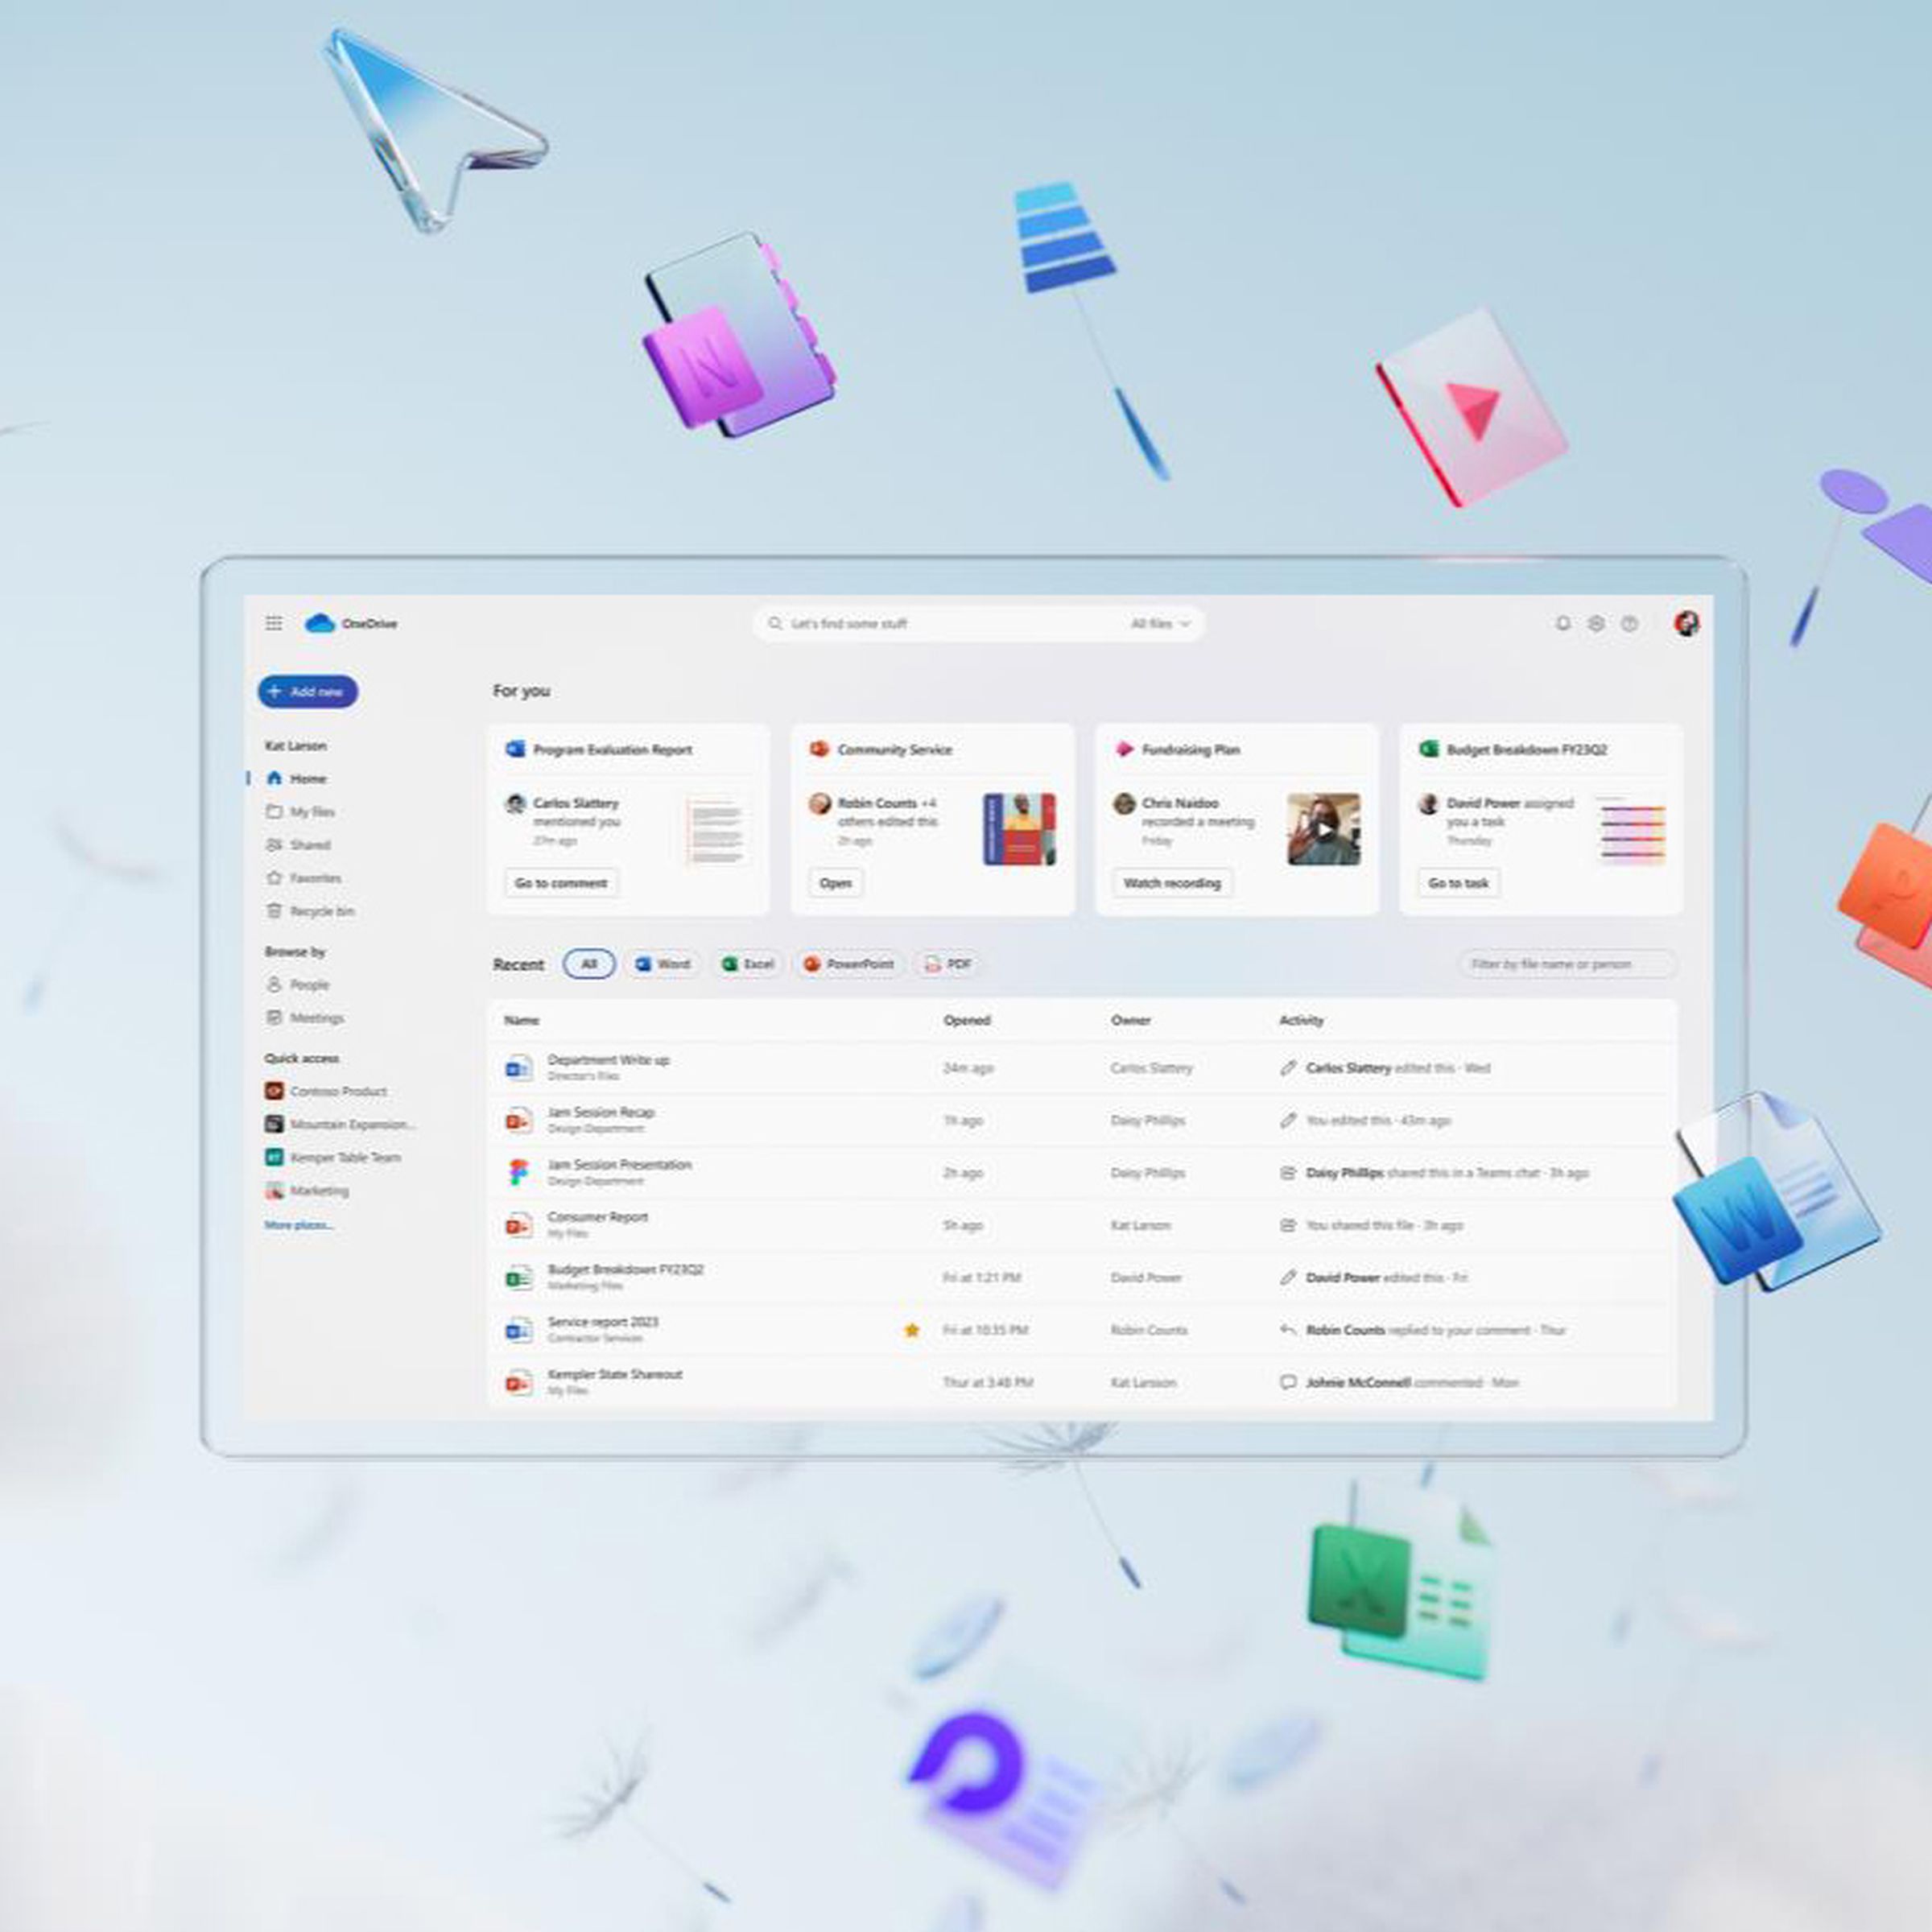 Illustration of the new OneDrive UI